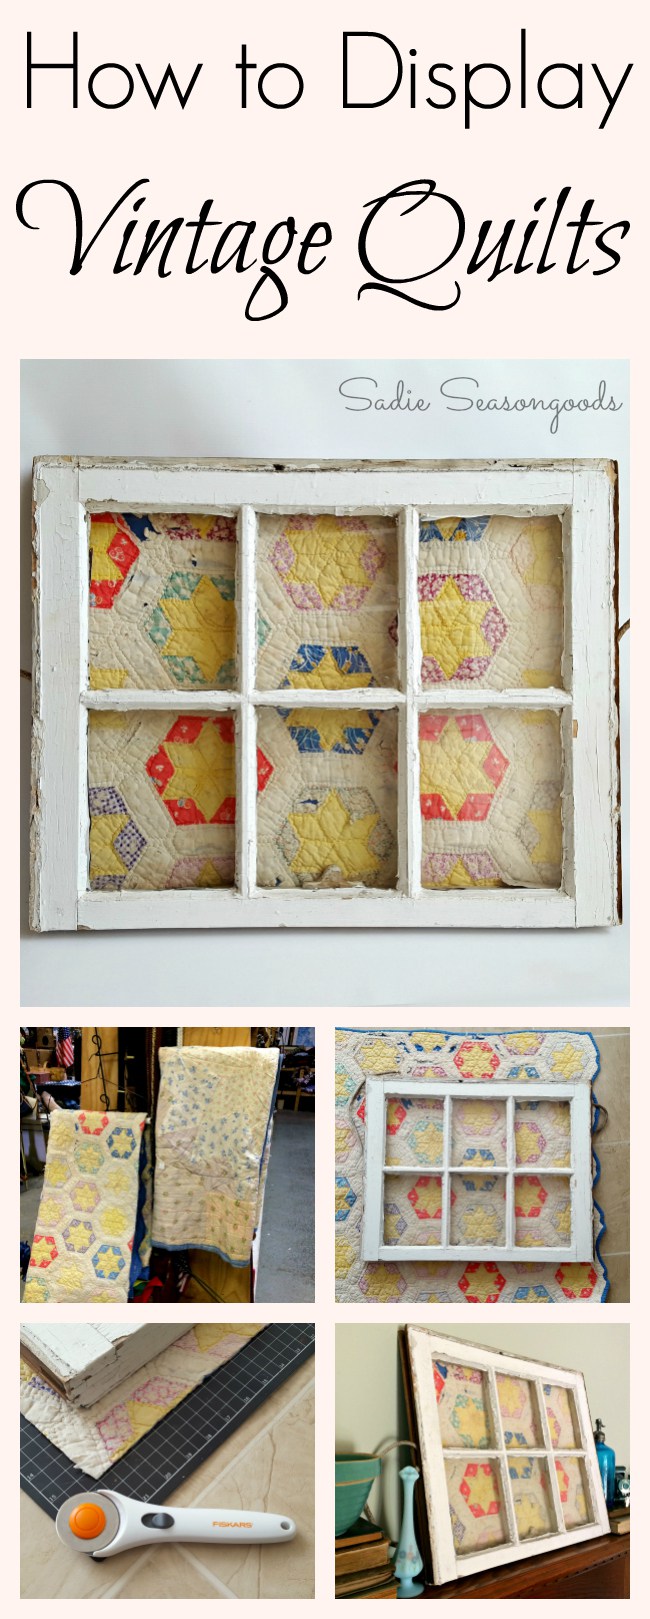 How_to_Display_Vintage_Quilt_with_Antique_Salvaged_Window_frame_by_Sadie_Seasongoods